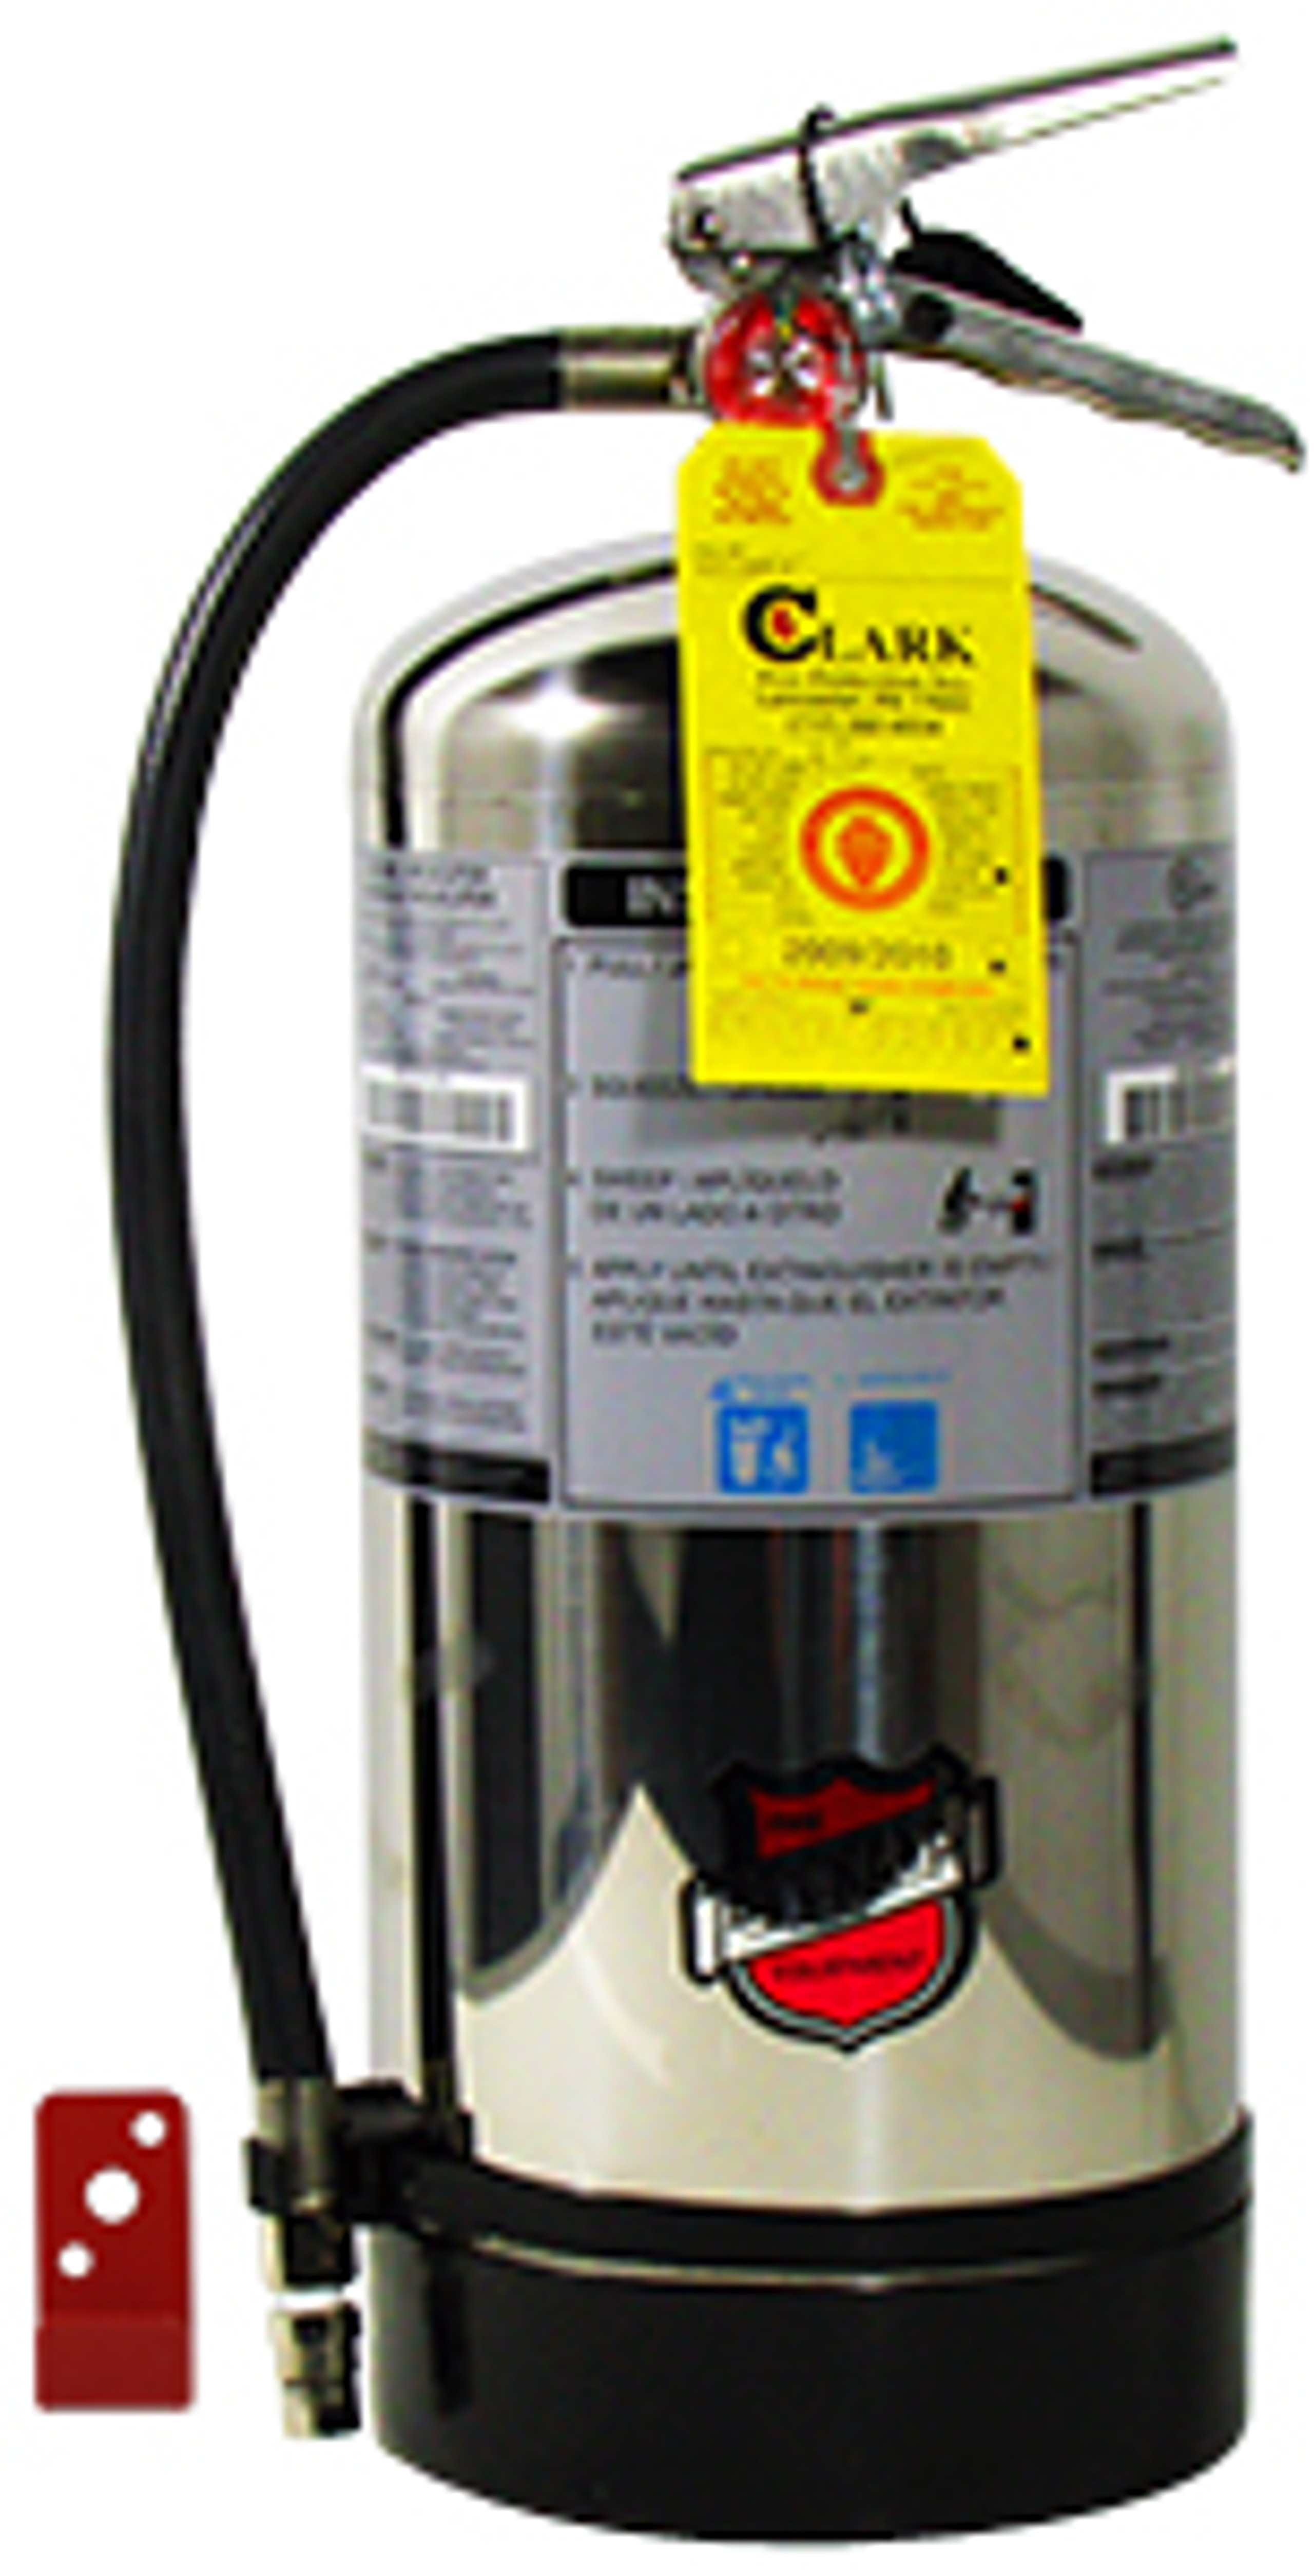 Fire Extinguisher Buckeye 6 Liter Class K Wet Chemical 472wc100 Socold Products 2959